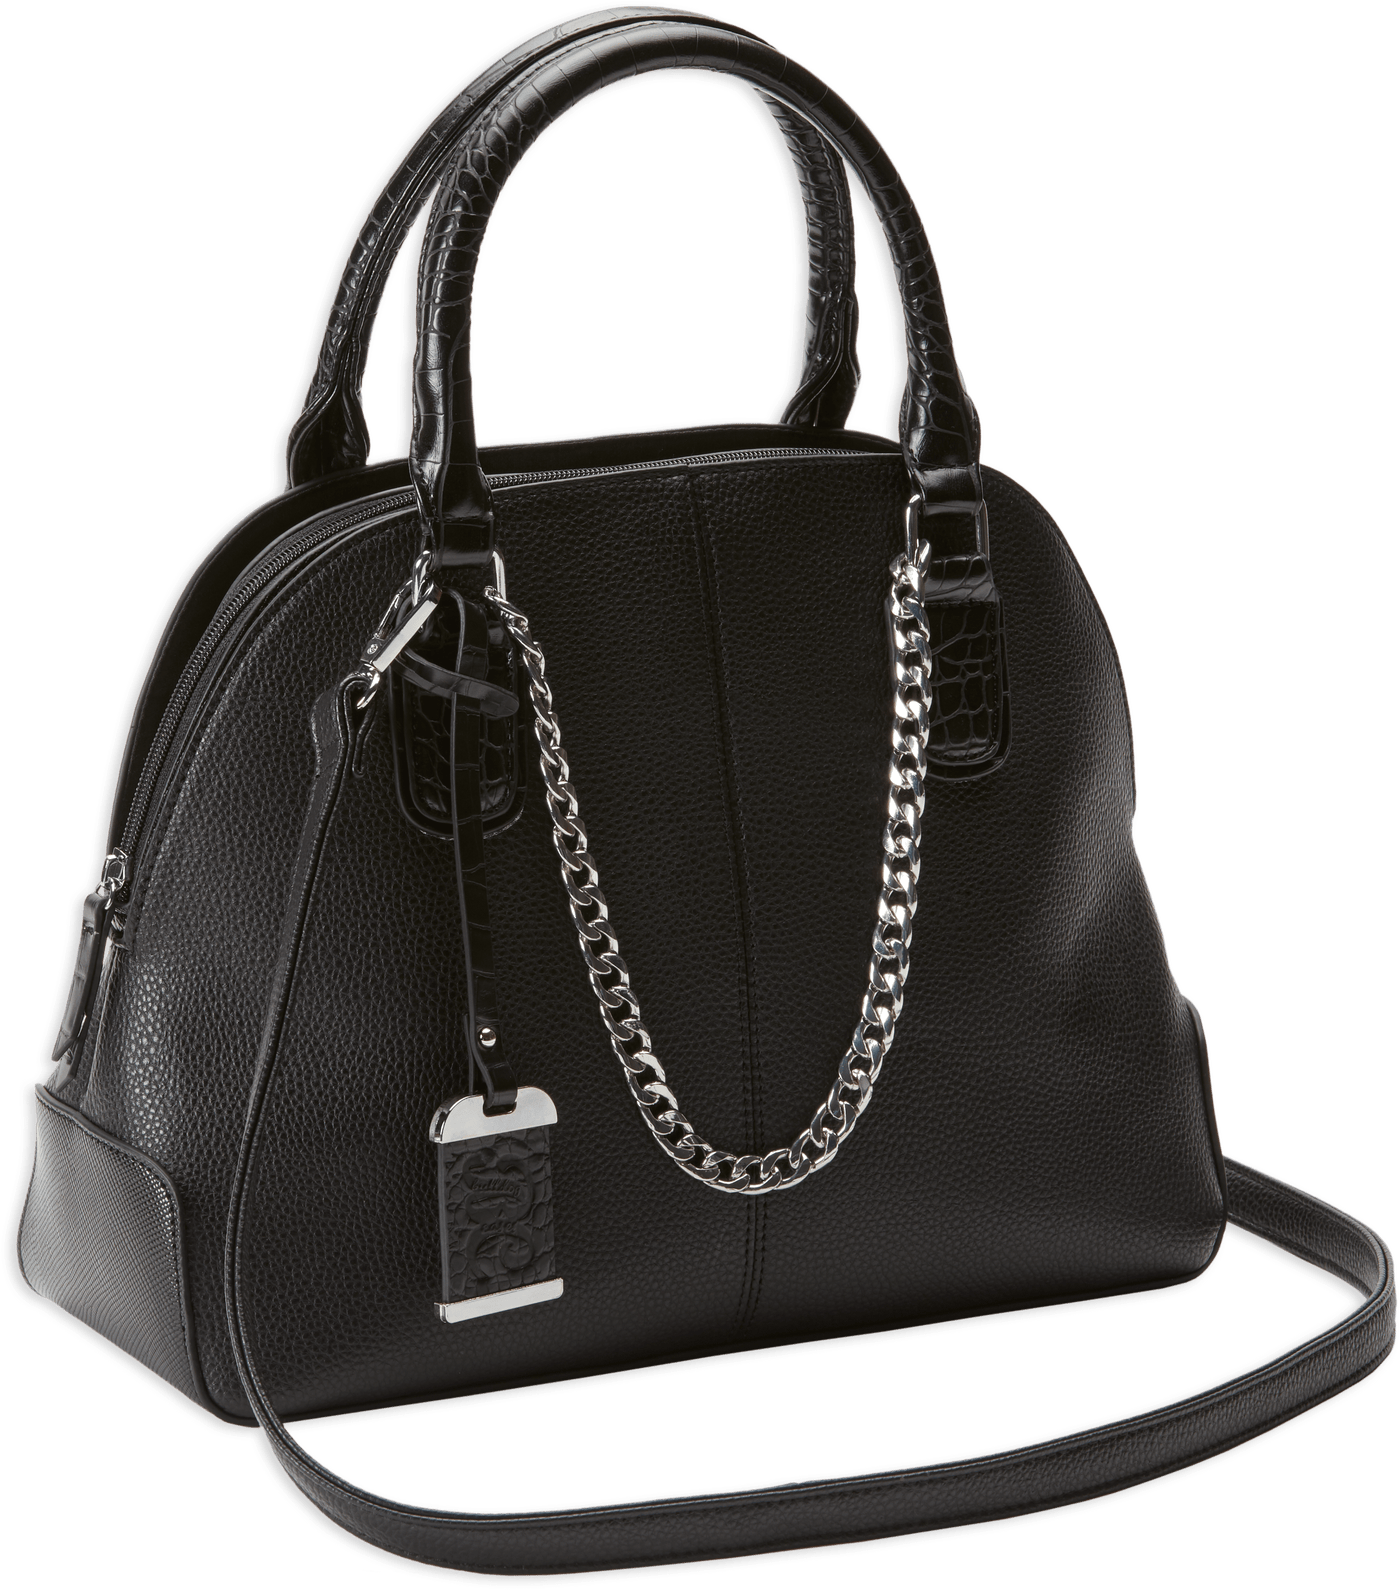 Bulldog Bulldog Concealed Carry Purse - W/ Holster Satchel Style Black Concealed Carry Handbags